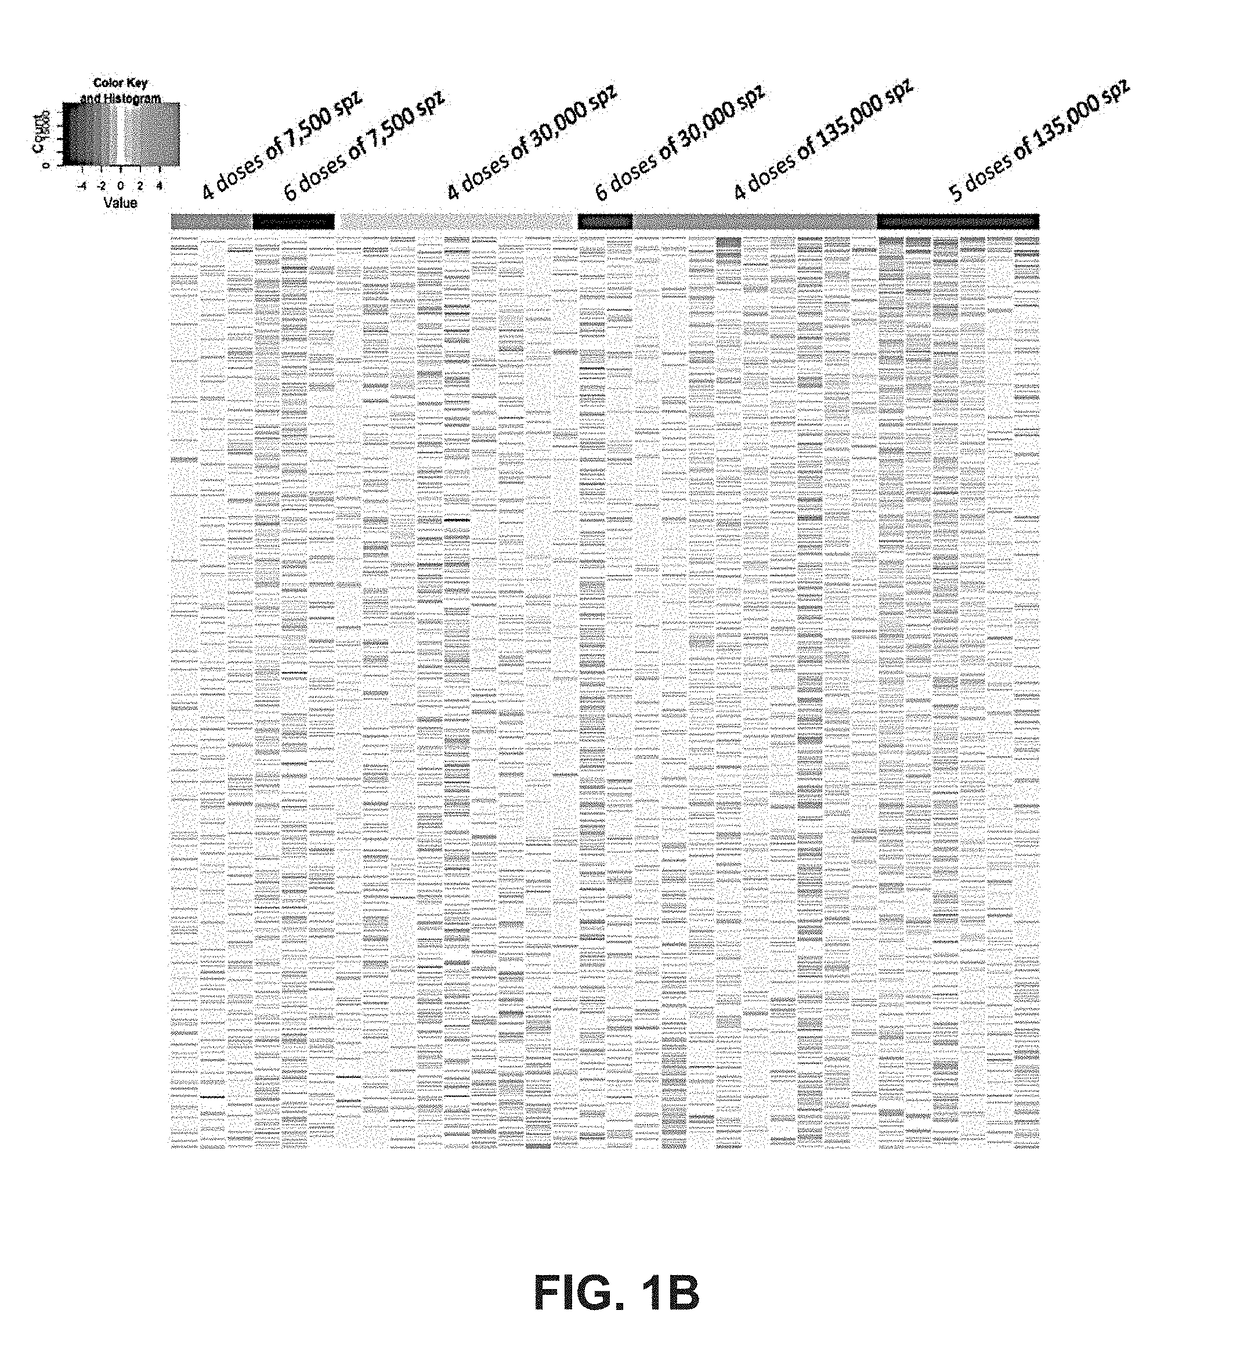 Serum antibody assay for determining protection from malaria, and pre-erythrocytic subunit vaccines